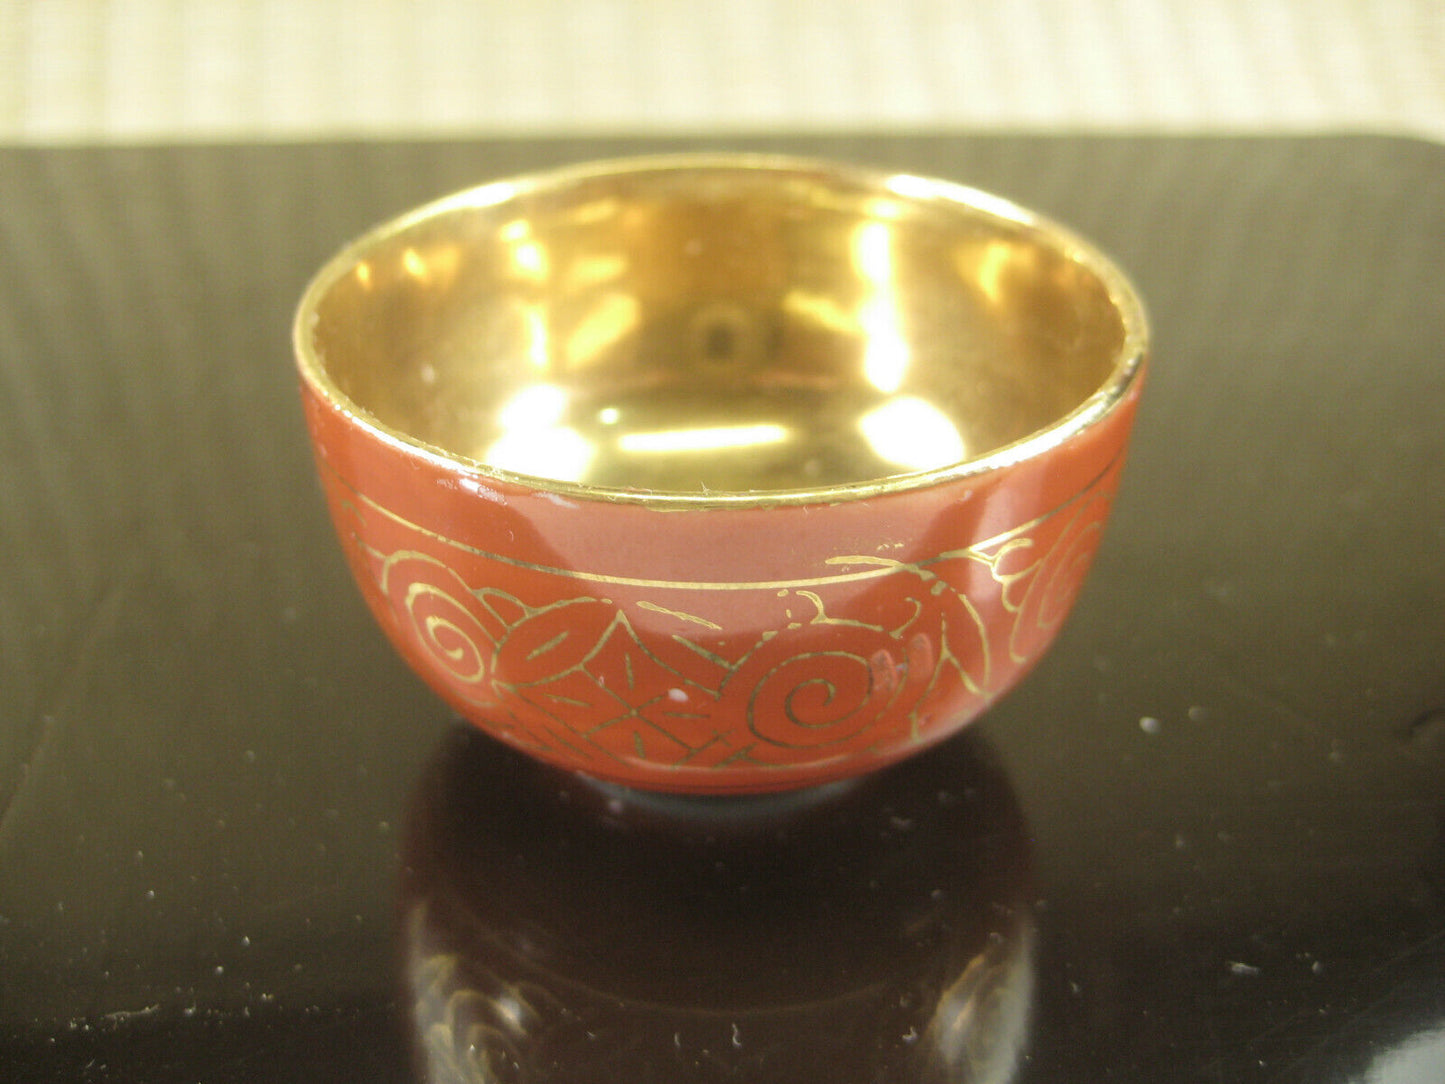 Antique Japanese (C.1900) Hand Painted Ceramic Sake Cup Red Body & Gold Bowl